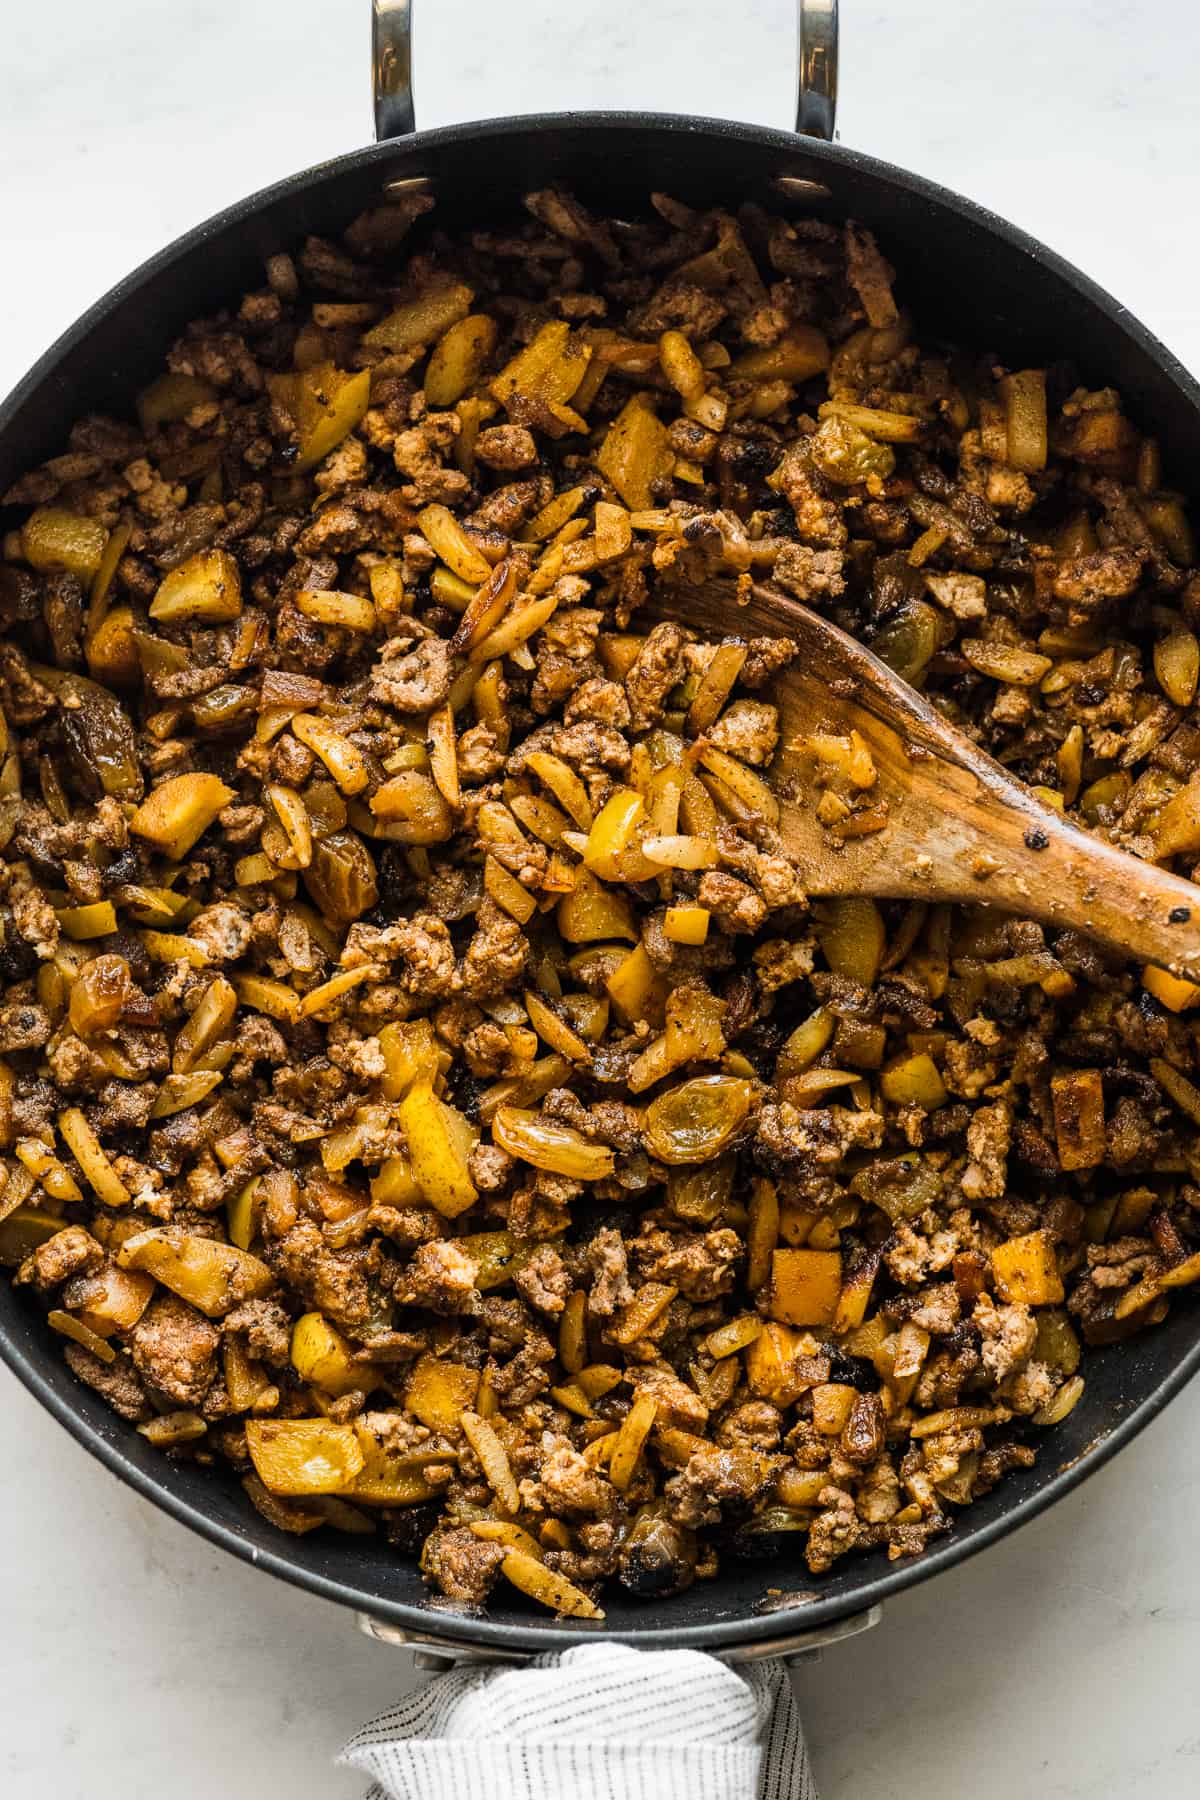 The cooked filling for chiles en nogada made from dried fruits, ground beef, and ground pork in a skillet.